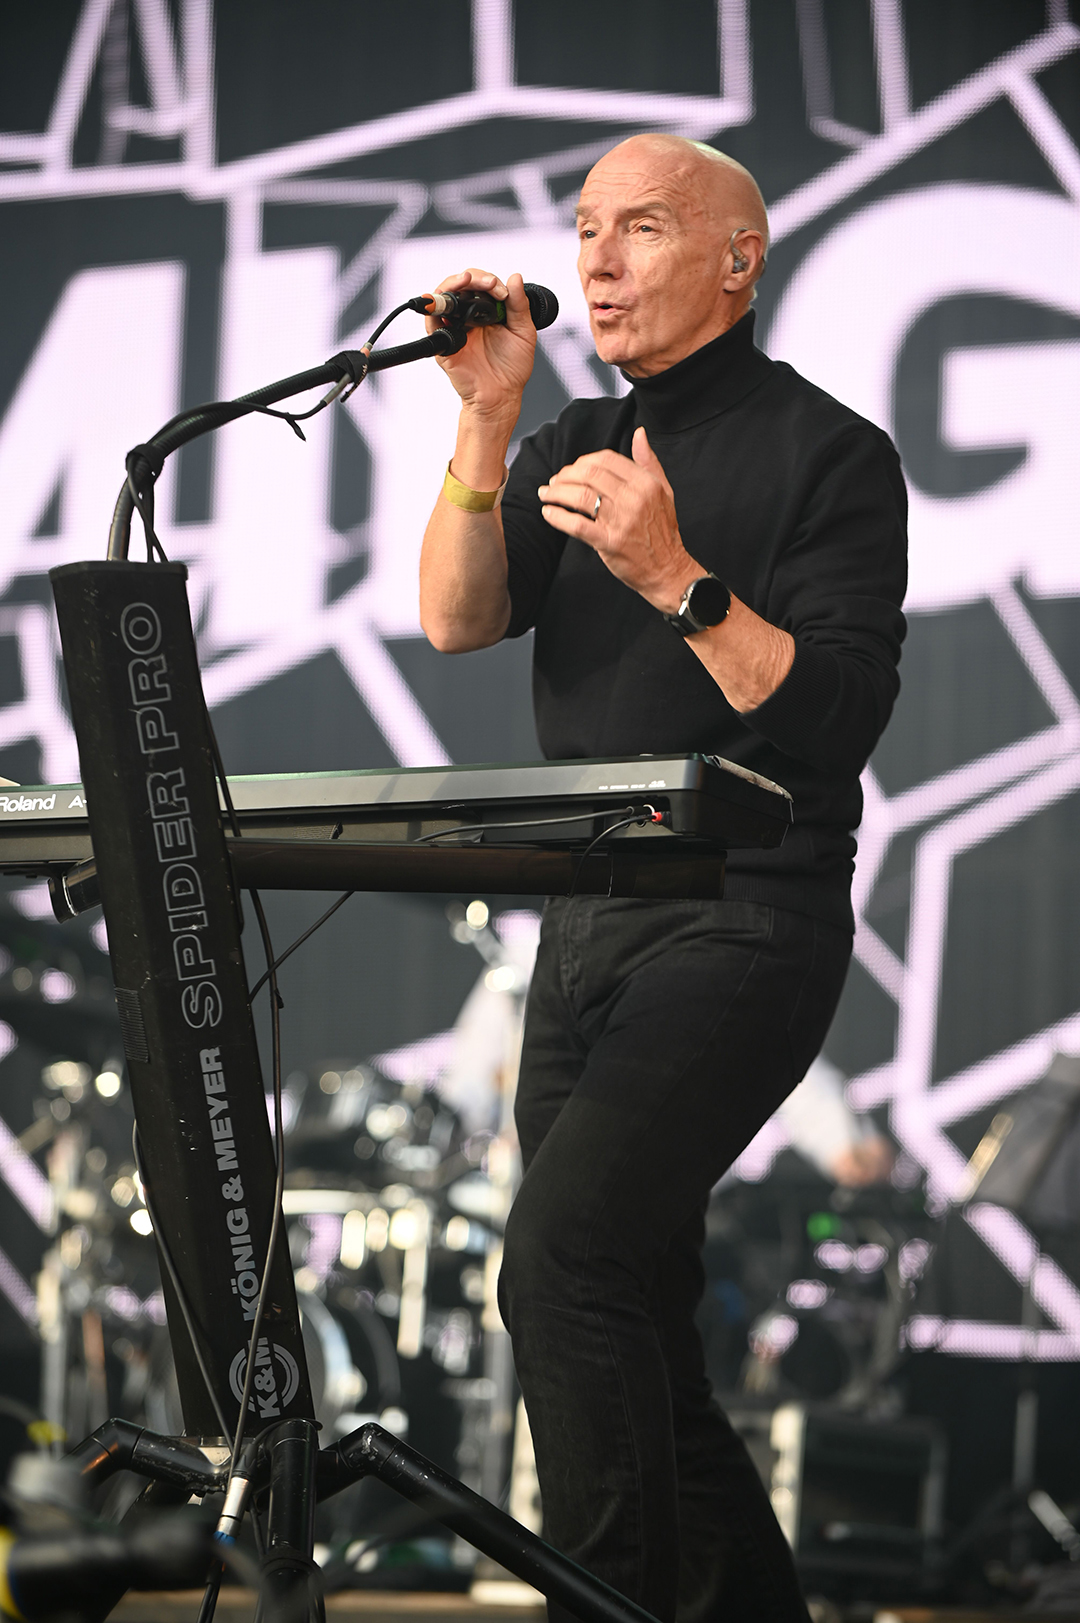 Midge Ure performing at the Let’s Rock festival in Leeds